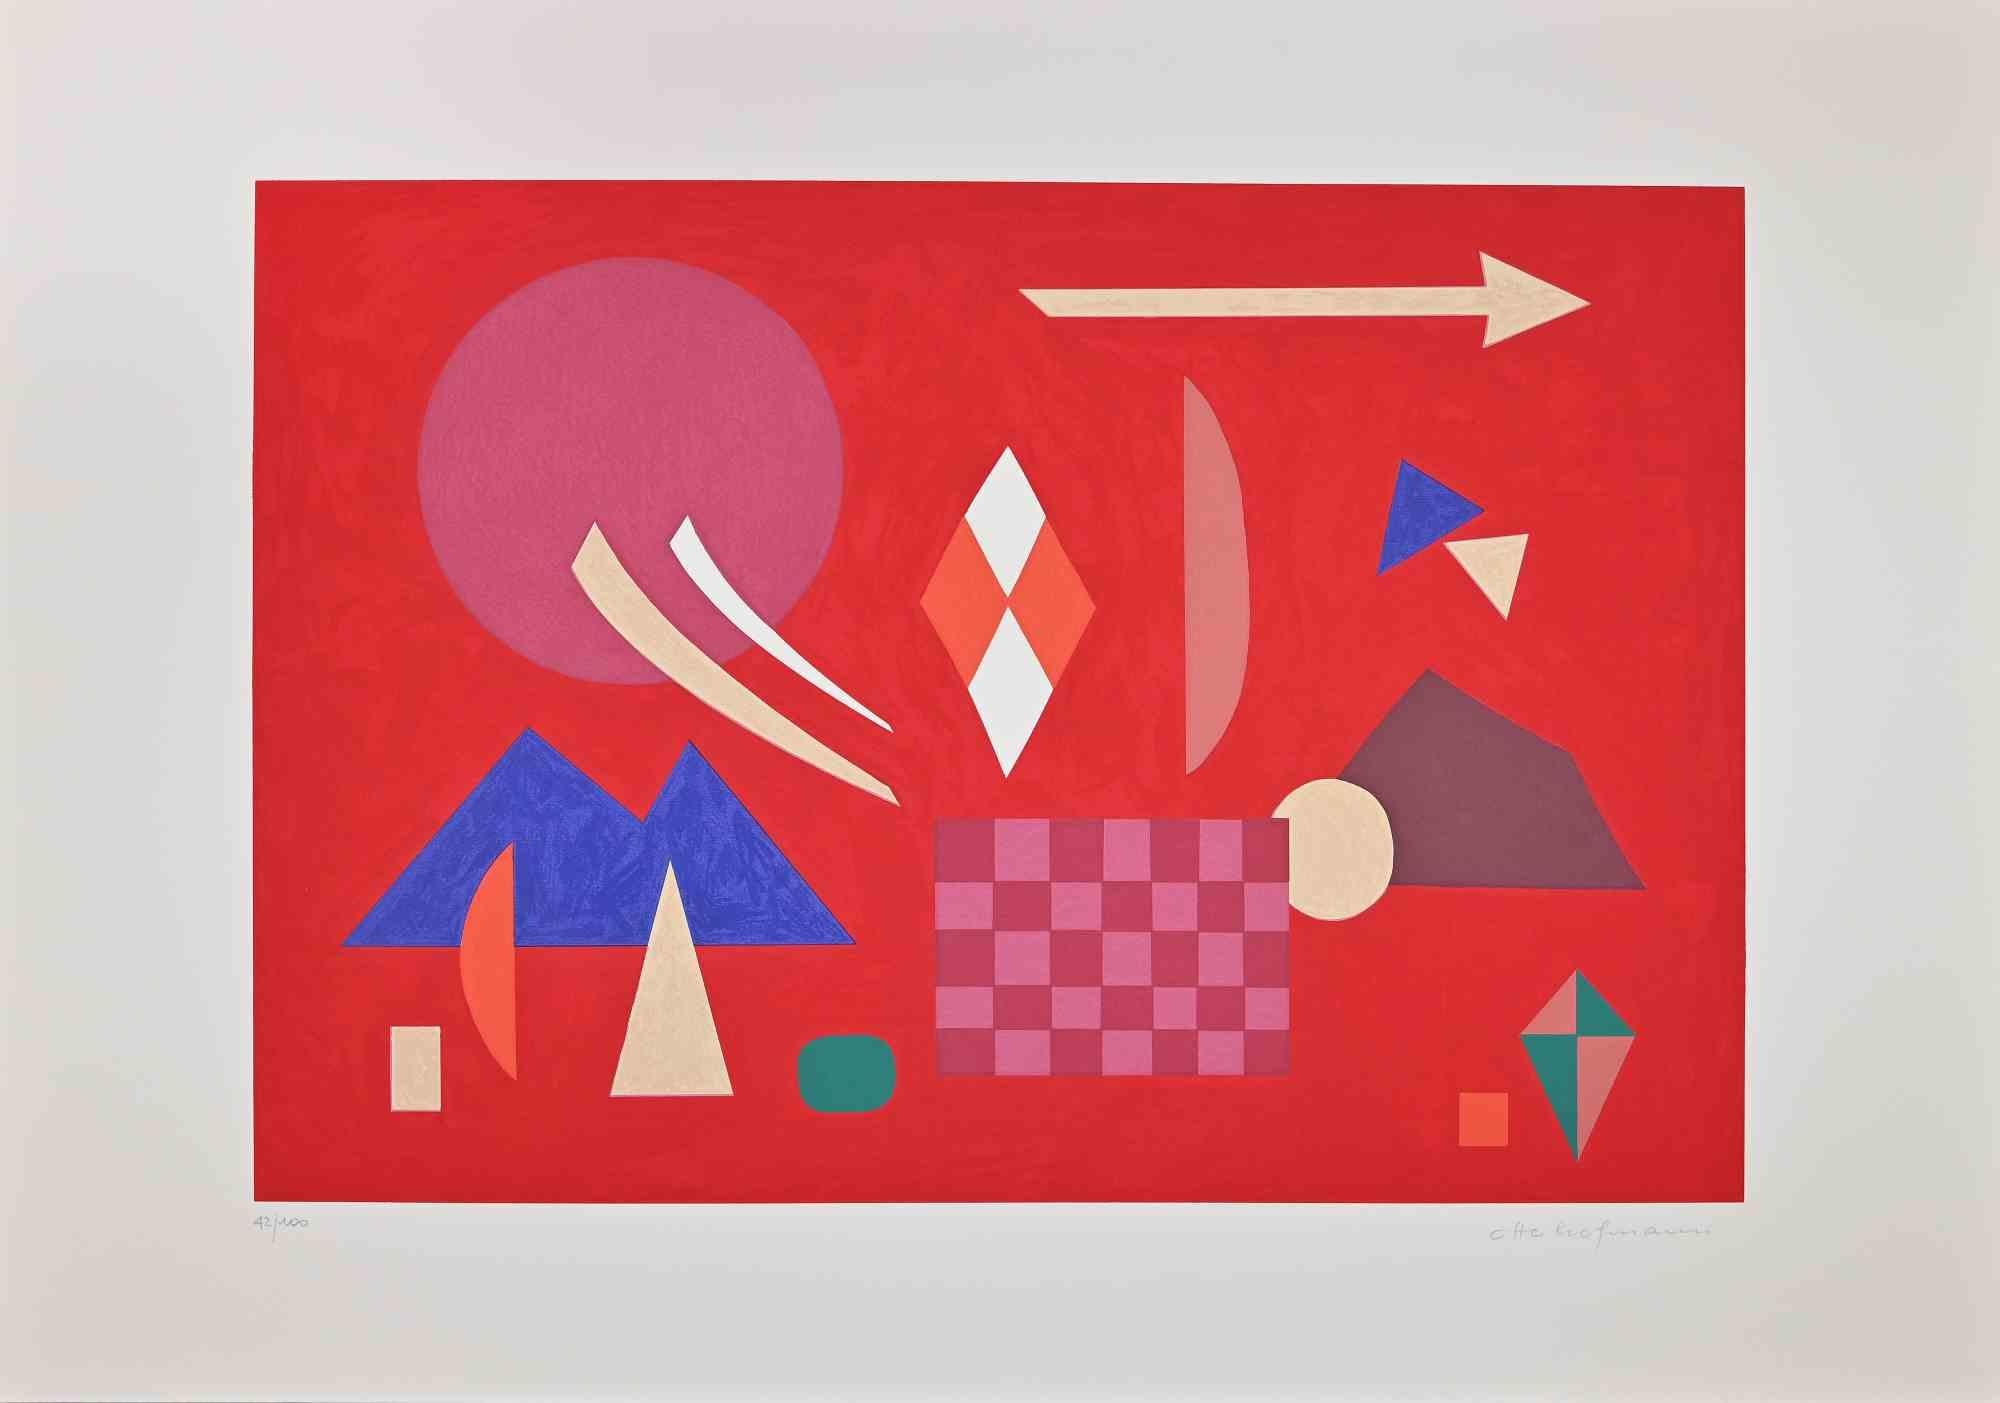 Red composition is an original contemporary artwork realized by Otto Hofmann in 1989.

Mixed colored screen print.

Hand signed on the lower right margin.

Numbered on the lower left. Edition of 42/100.

The artwork is from a potfolio edited by